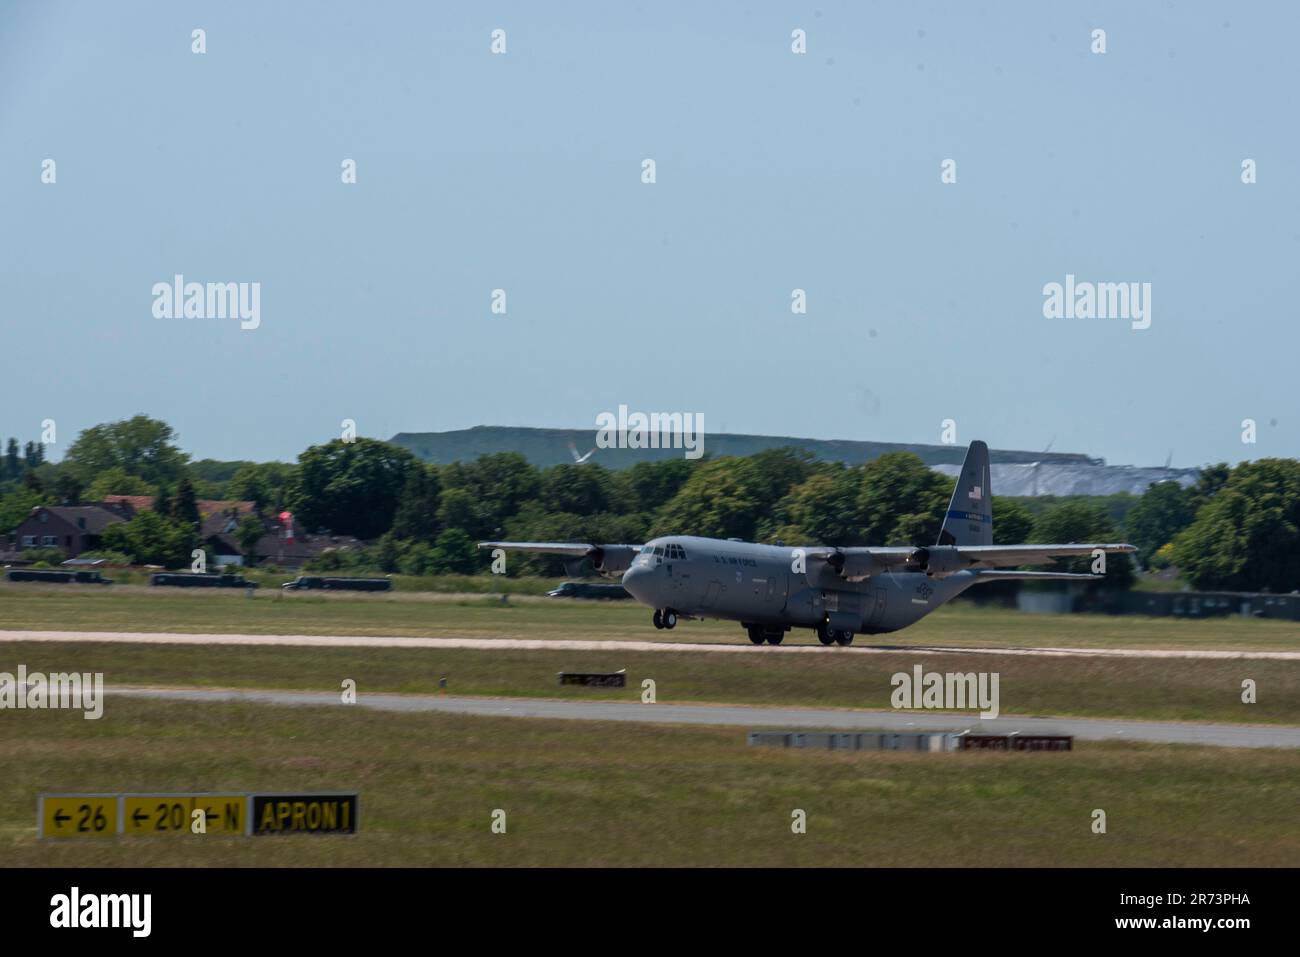 A U.S. Air Force C-130J Super Hercules aircraft operated by the 123rd Airlift Wing, Kentucky National Guard, lifts off of the runway during exercise Air Defender 2023 (AD23) at Wunstorf Air Base, Wunstorf, Germany, June 4, 2023. Exercise AD23 integrates both U.S. and Allied air-power to defend shared values, while leveraging and strengthening vital partnerships to deter aggression around the world. (U.S. Air National Guard photo by Staff Sgt. Paul Helmig) Stock Photo